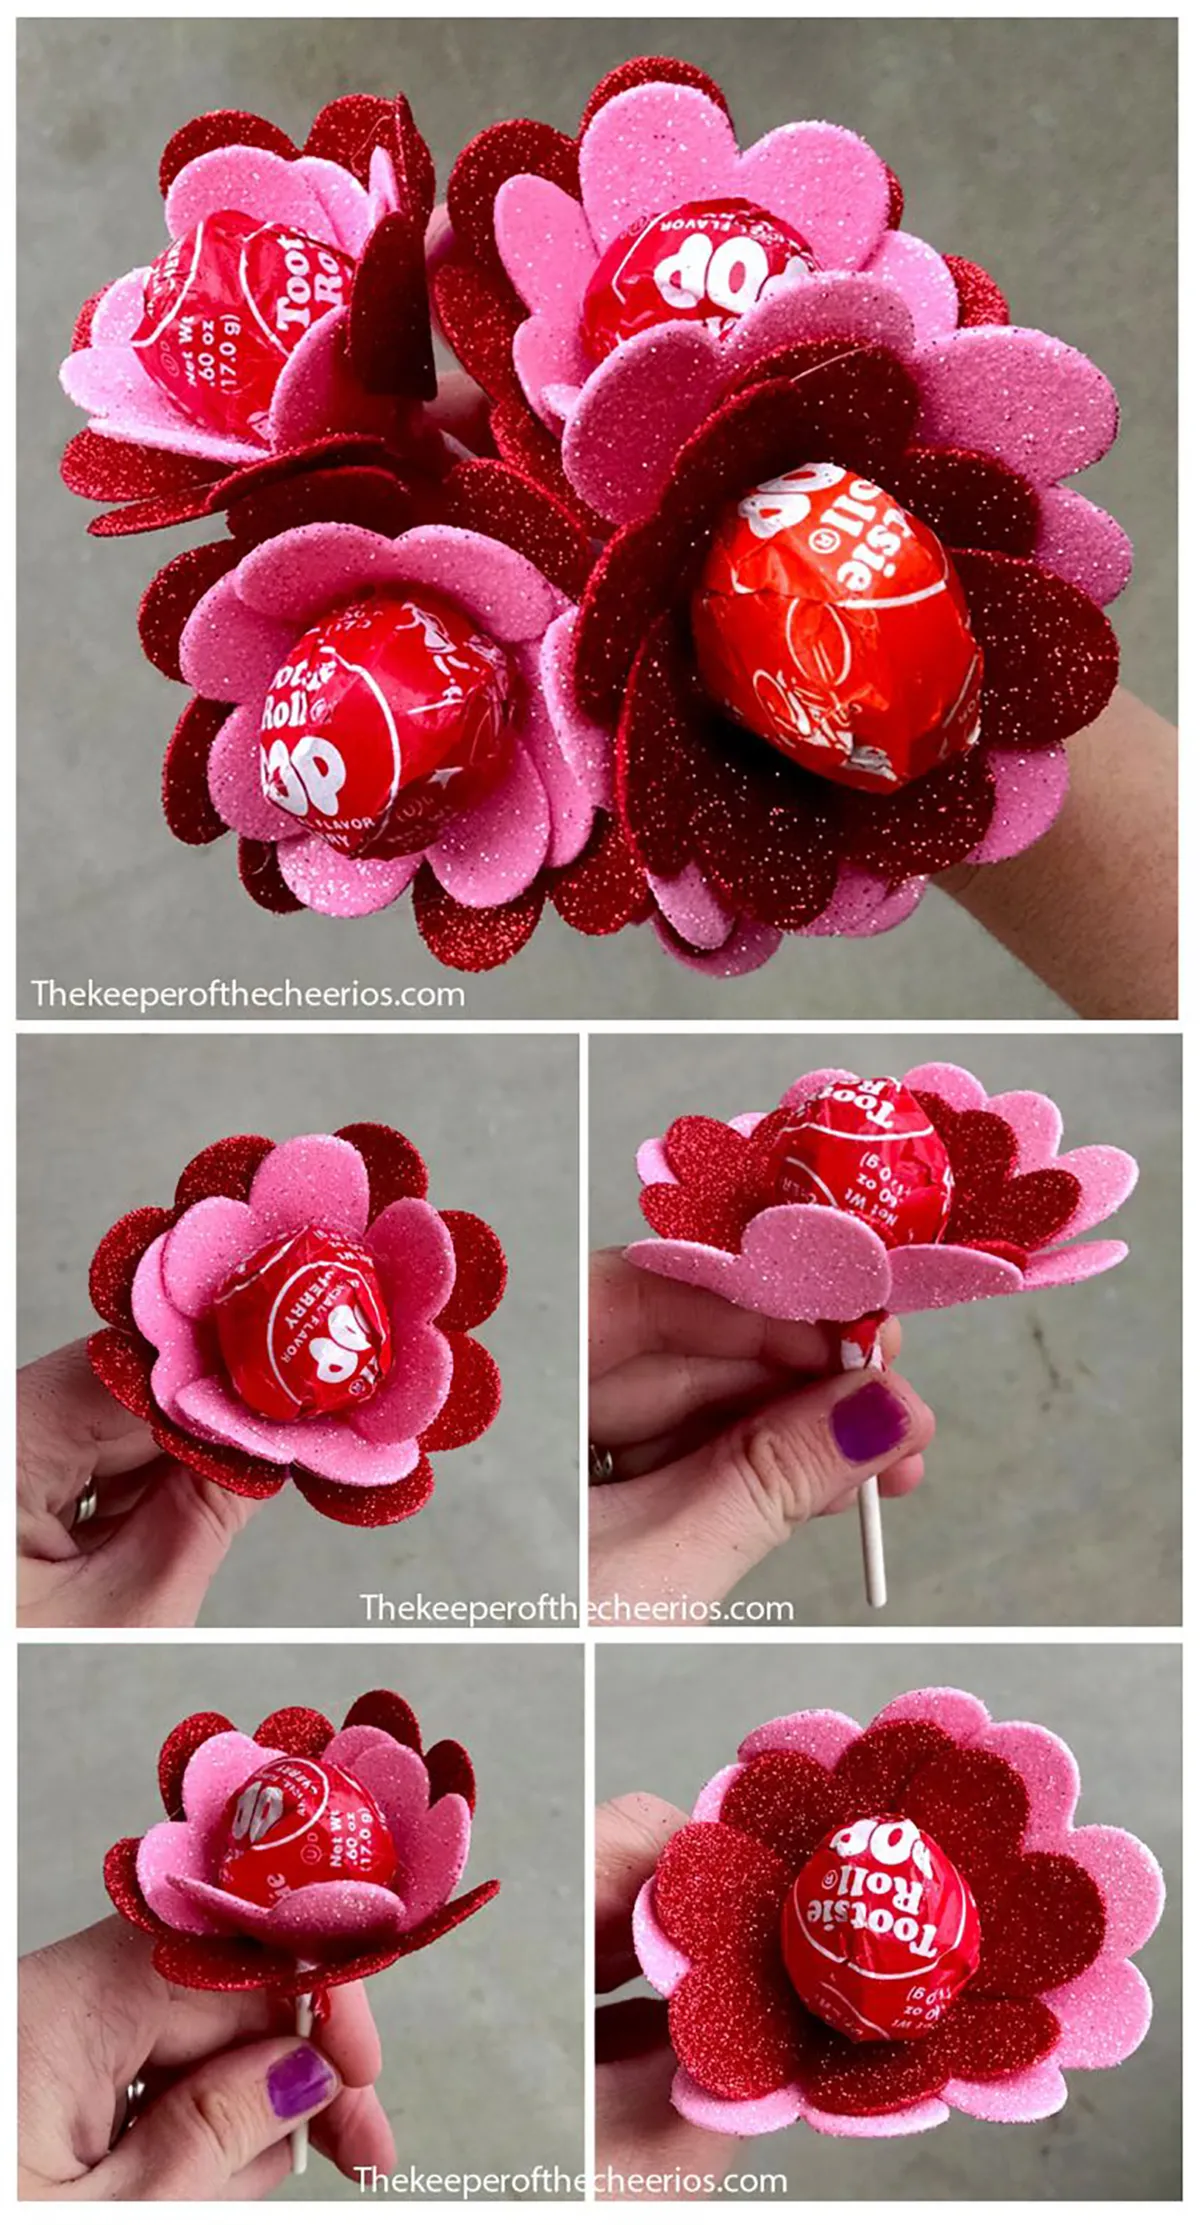 diy valentines decorations - lolly